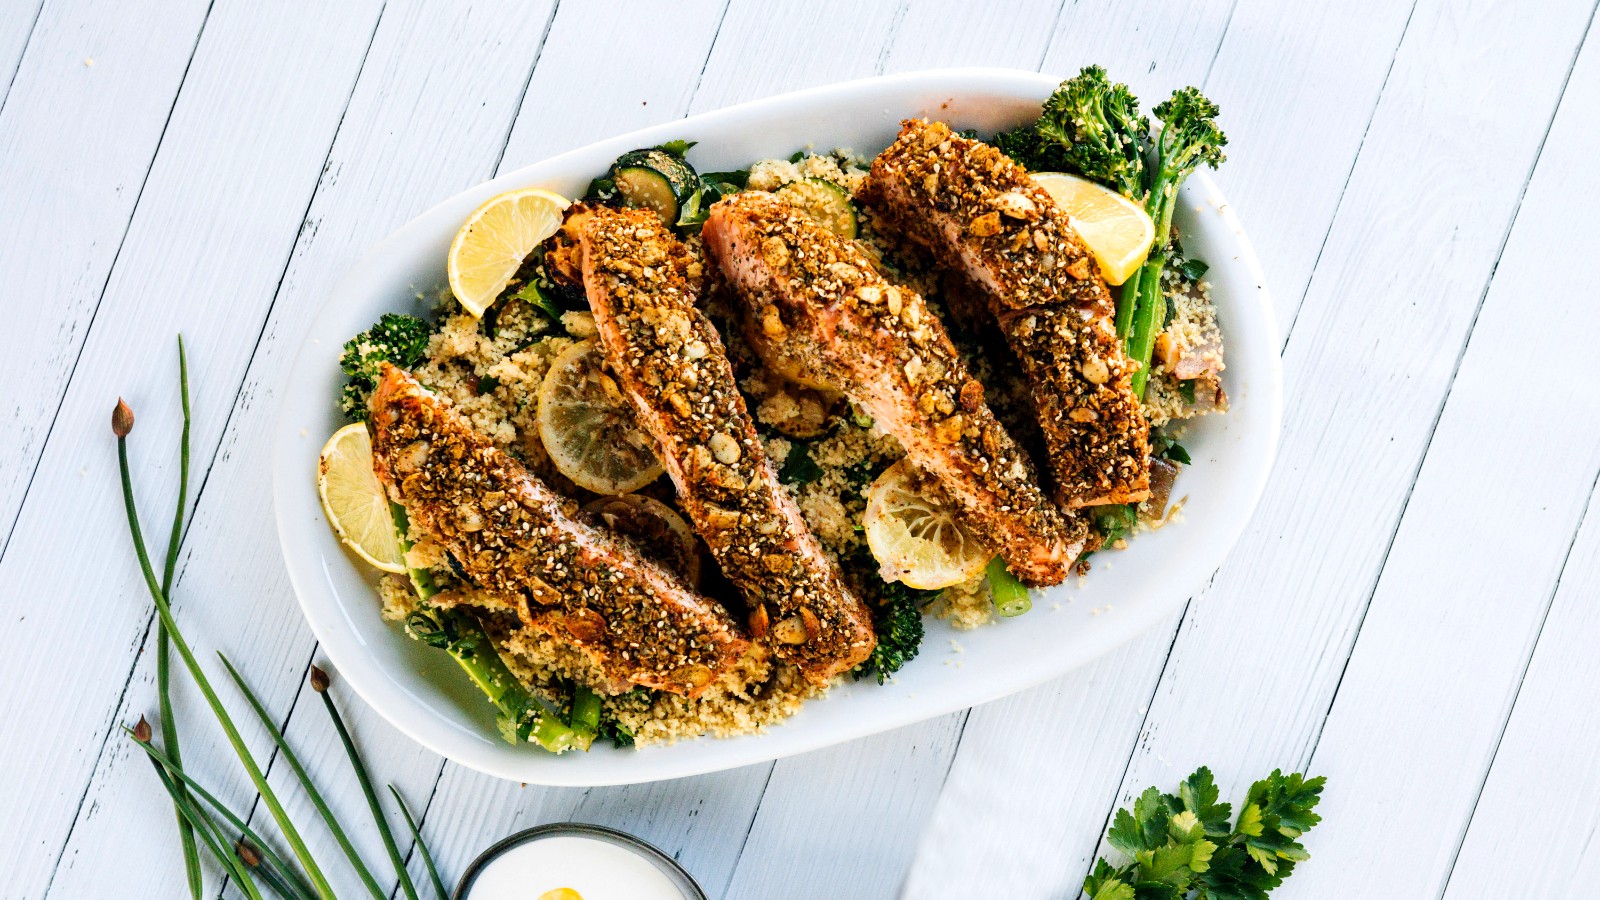 Image of Dukkah Crusted Salmon with Couscous & Greens